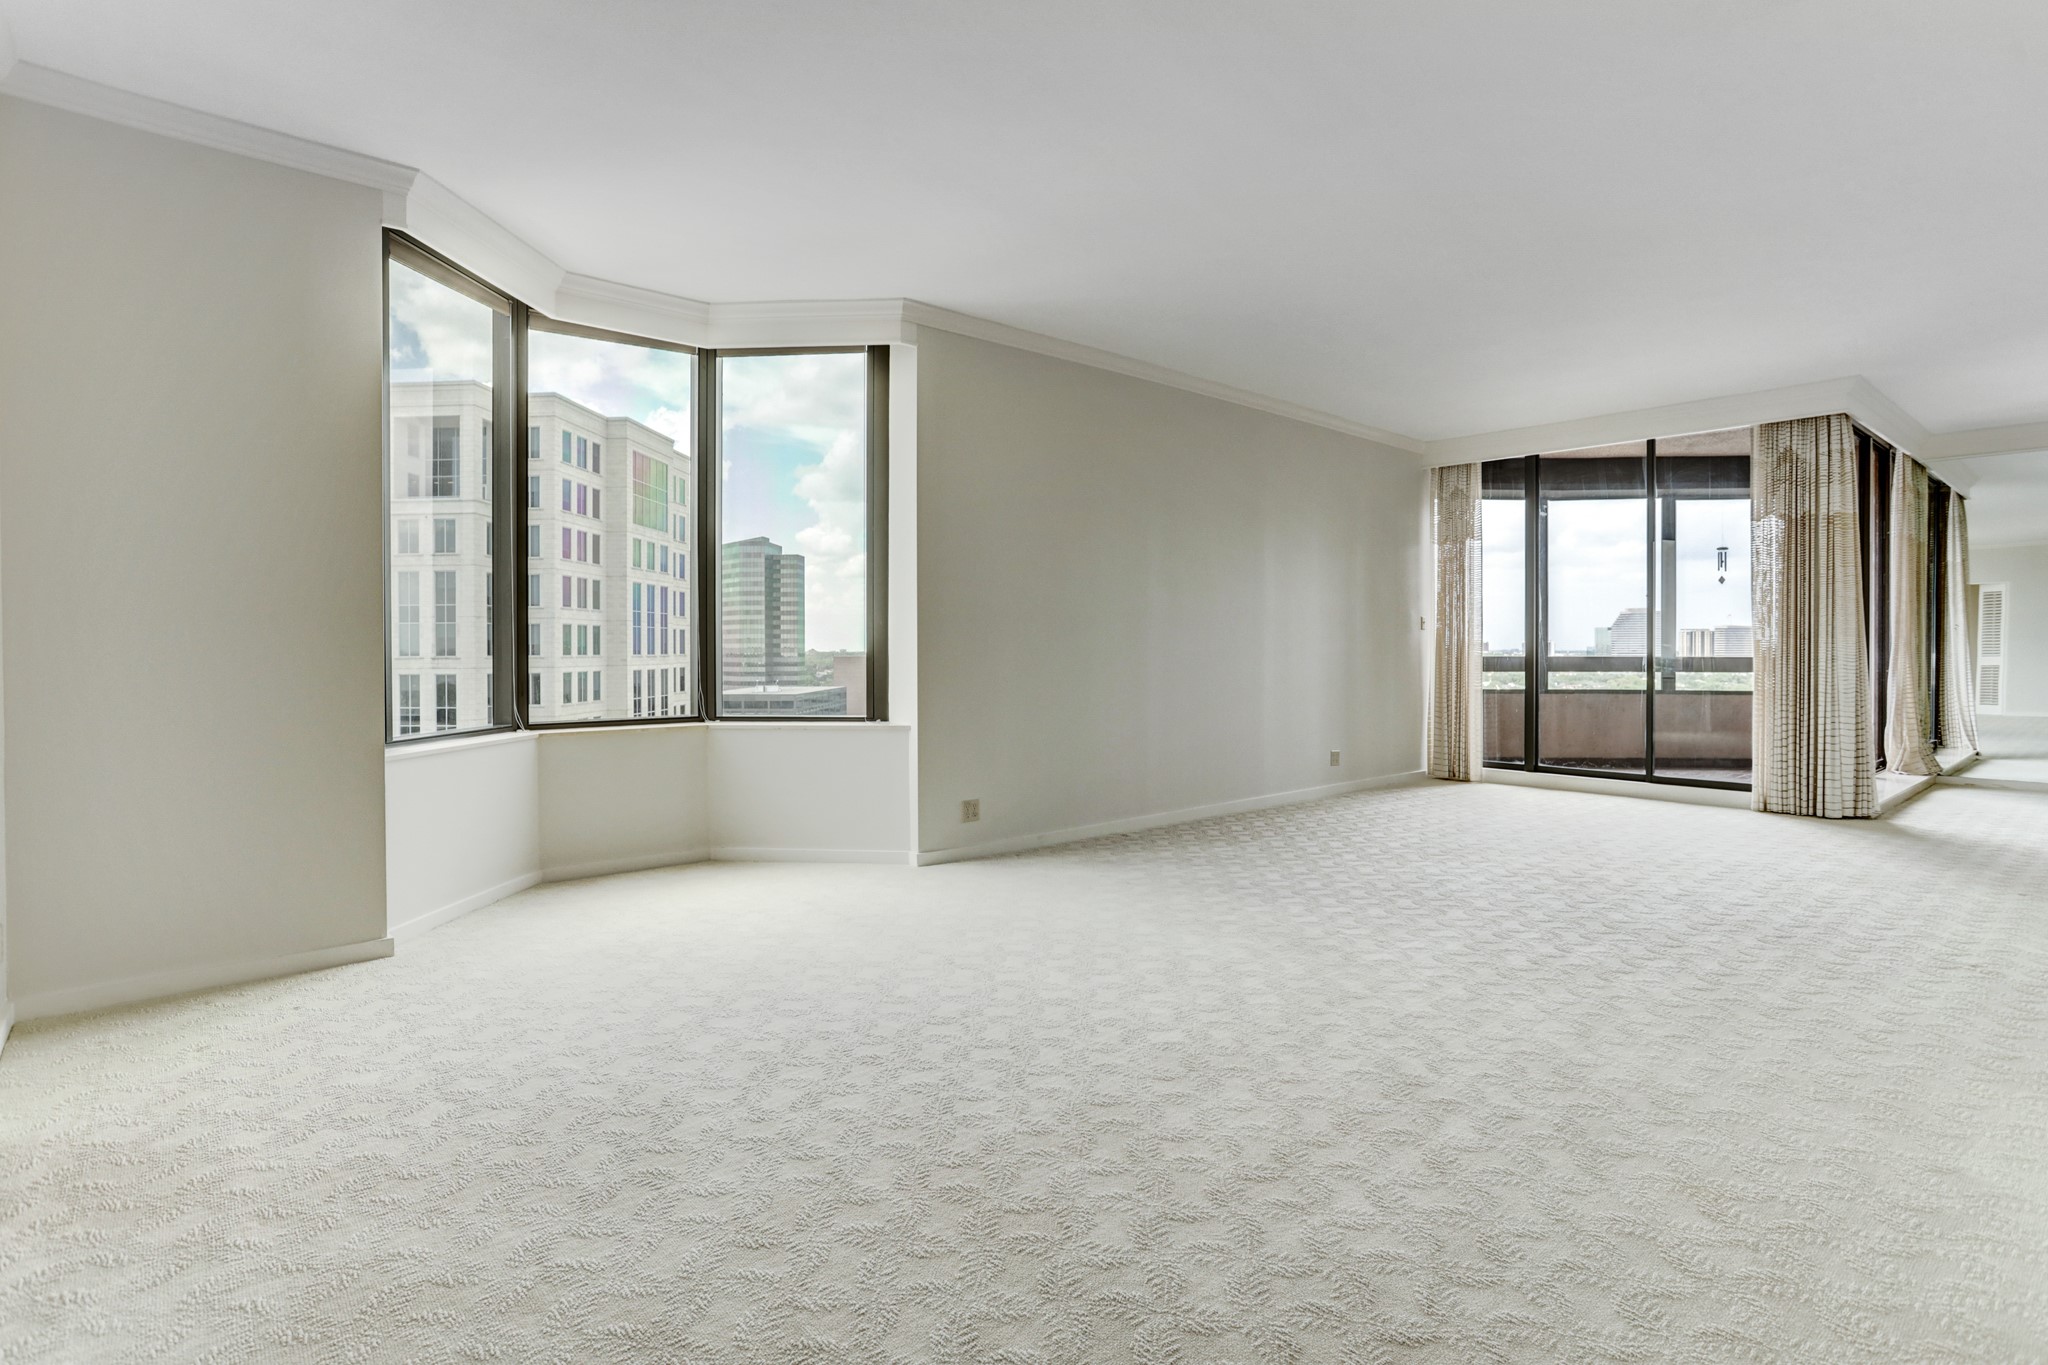 This very spacious, light filled living and dining area shows the smooth ceilings (seller removed all popcorn), fresh paint (throughout entire unit except study/office) and sweeping city views from every window.